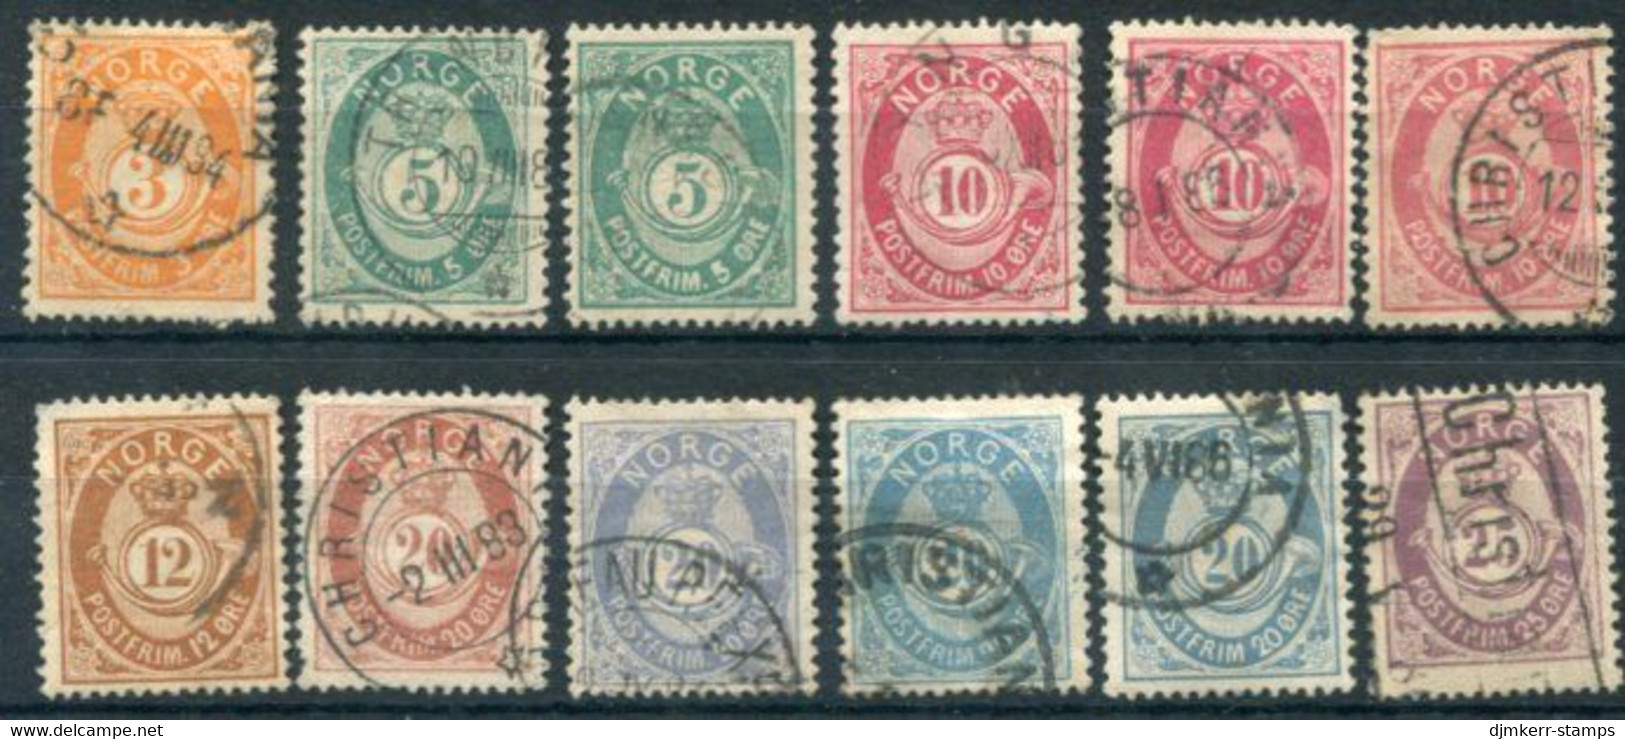 NORWAY 1882 Posthorn Definitive Set  Used.  Michel 35-42, Except 38. - Used Stamps